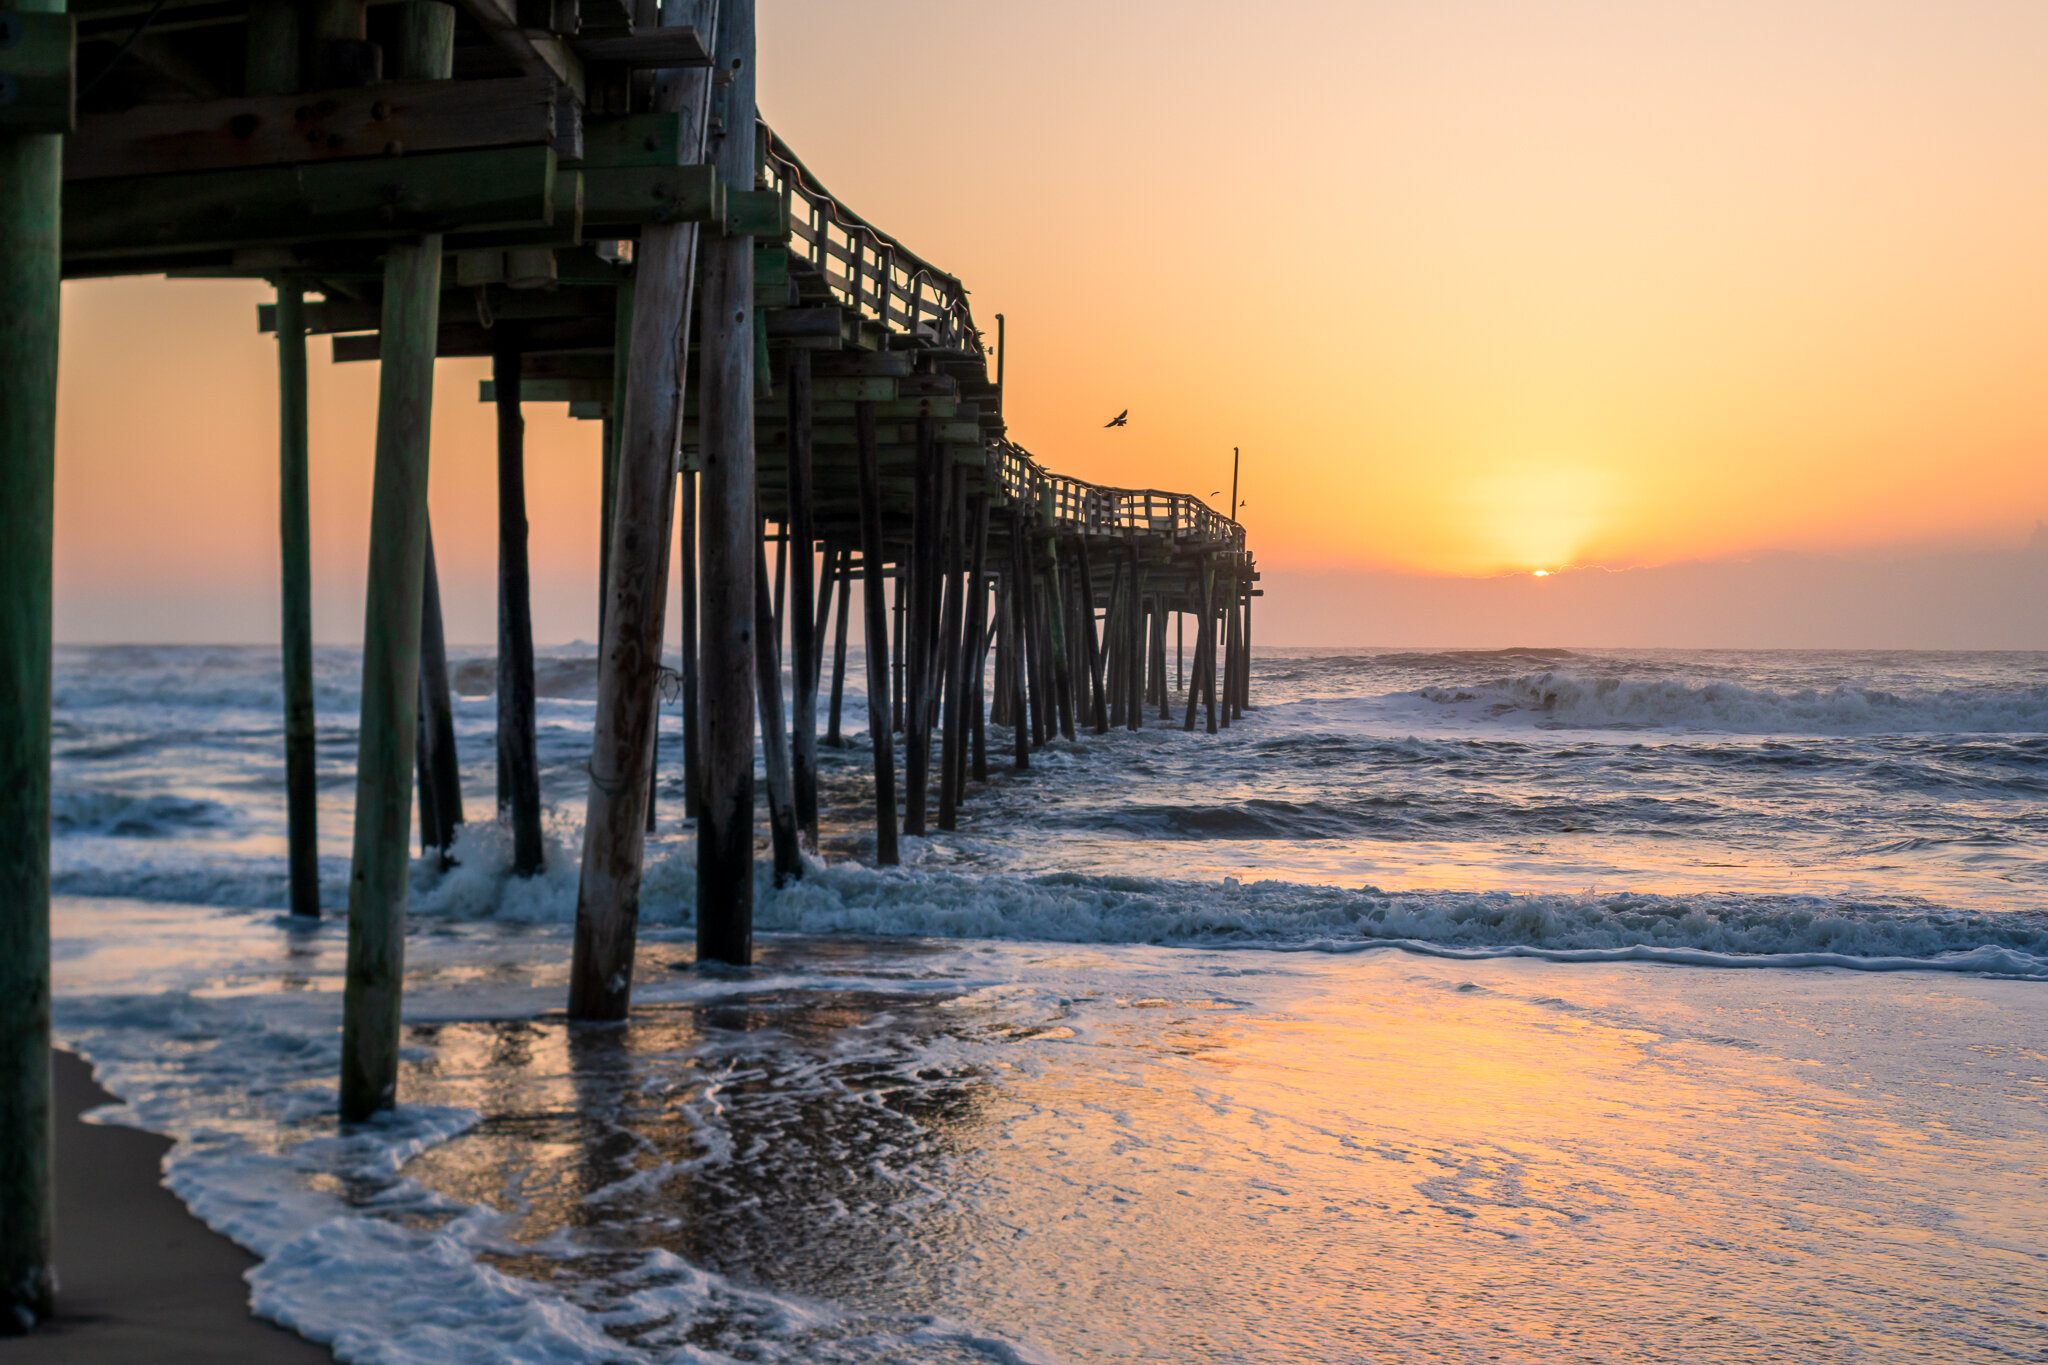 Longing for sunrises on the beach.  Sunrise at the @avonpier during last fall's Saltwater Retreat.

Registration is open for the 2024 Saltwater Retreats. I hope you'll join us there there 🧡

#lensbaby #lensbabyedge #sunrise #avonfishingpier #avon #a